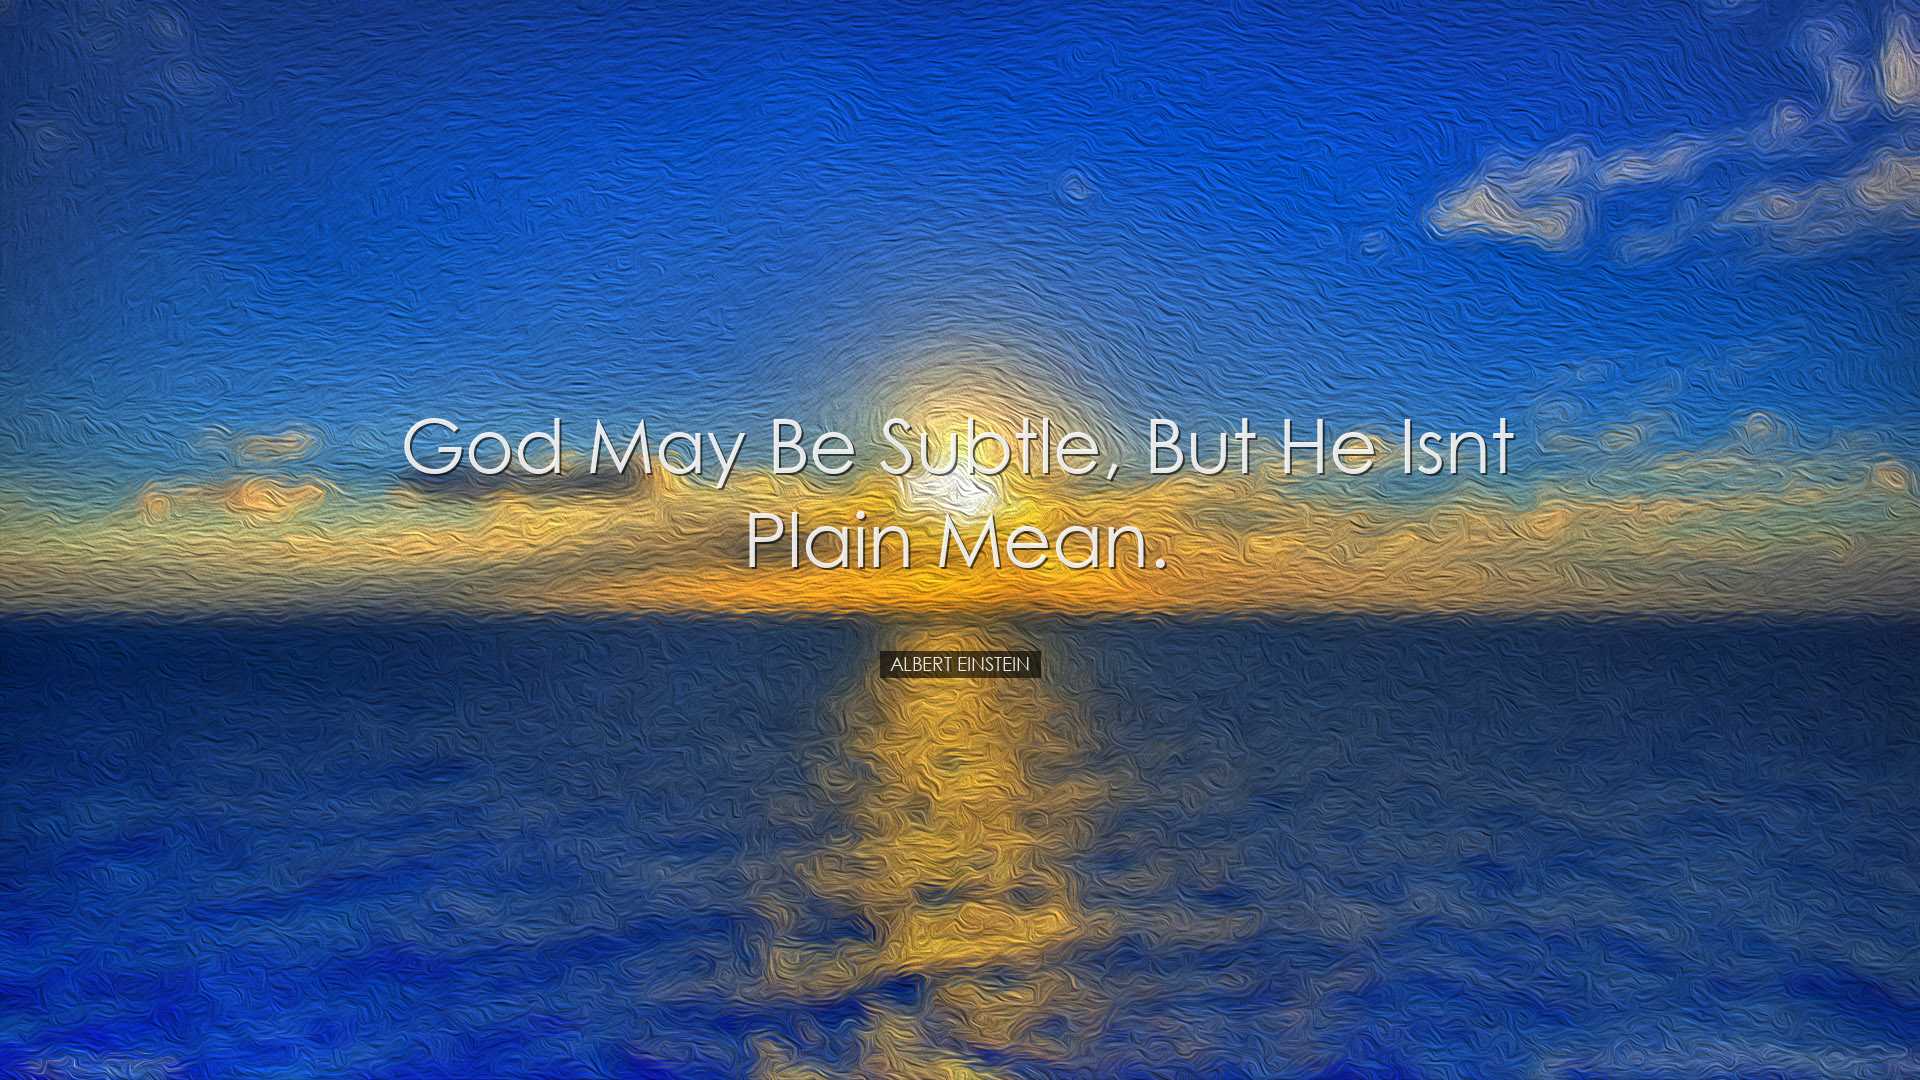 God may be subtle, but he isnt plain mean. - Albert Einstein